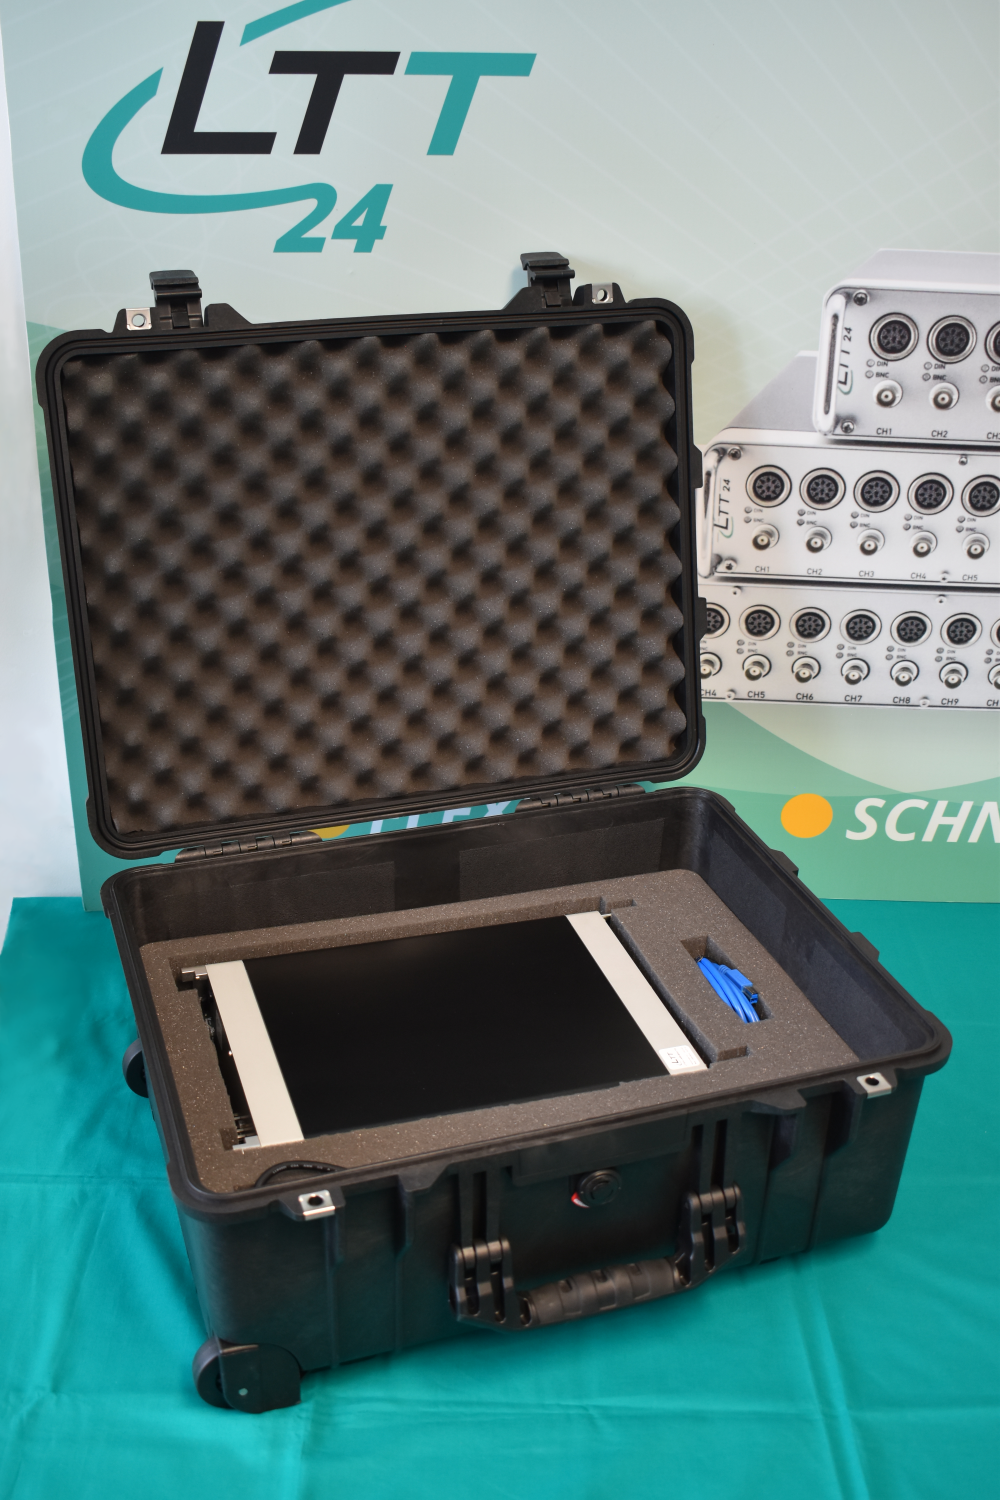 Protective case for your precision measuring instrument